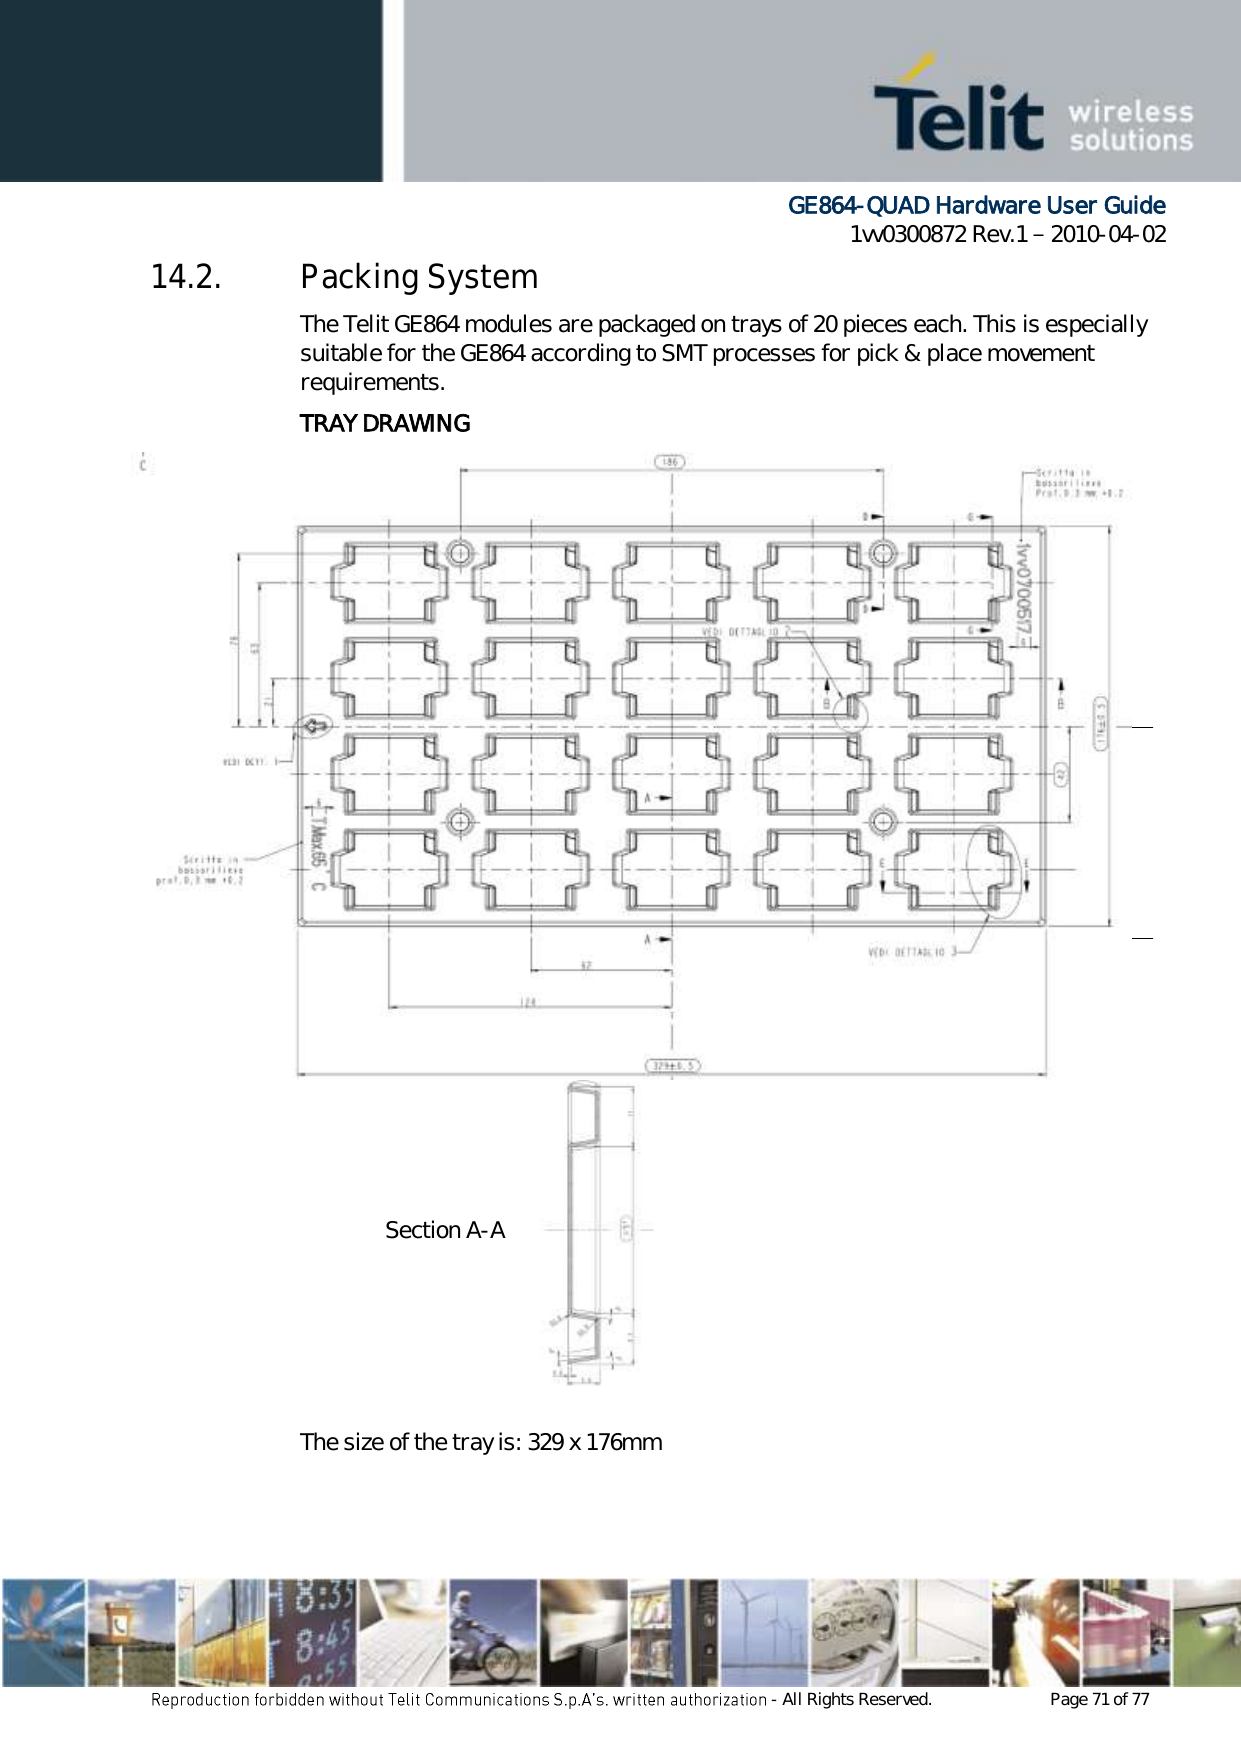      GE864-QUAD Hardware User Guide 1vv0300872 Rev.1   2010-04-02 - All Rights Reserved.    Page 71 of 77  14.2. Packing System The Telit GE864 modules are packaged on trays of 20 pieces each. This is especially suitable for the GE864 according to SMT processes for pick &amp; place movement requirements. TRAY DRAWING  The size of the tray is: 329 x 176mm   NOTE: All temperatures refer to topside of the package, measured on the package body surface. NOTE: GE864 module can accept only one reflow process. Section A-A 